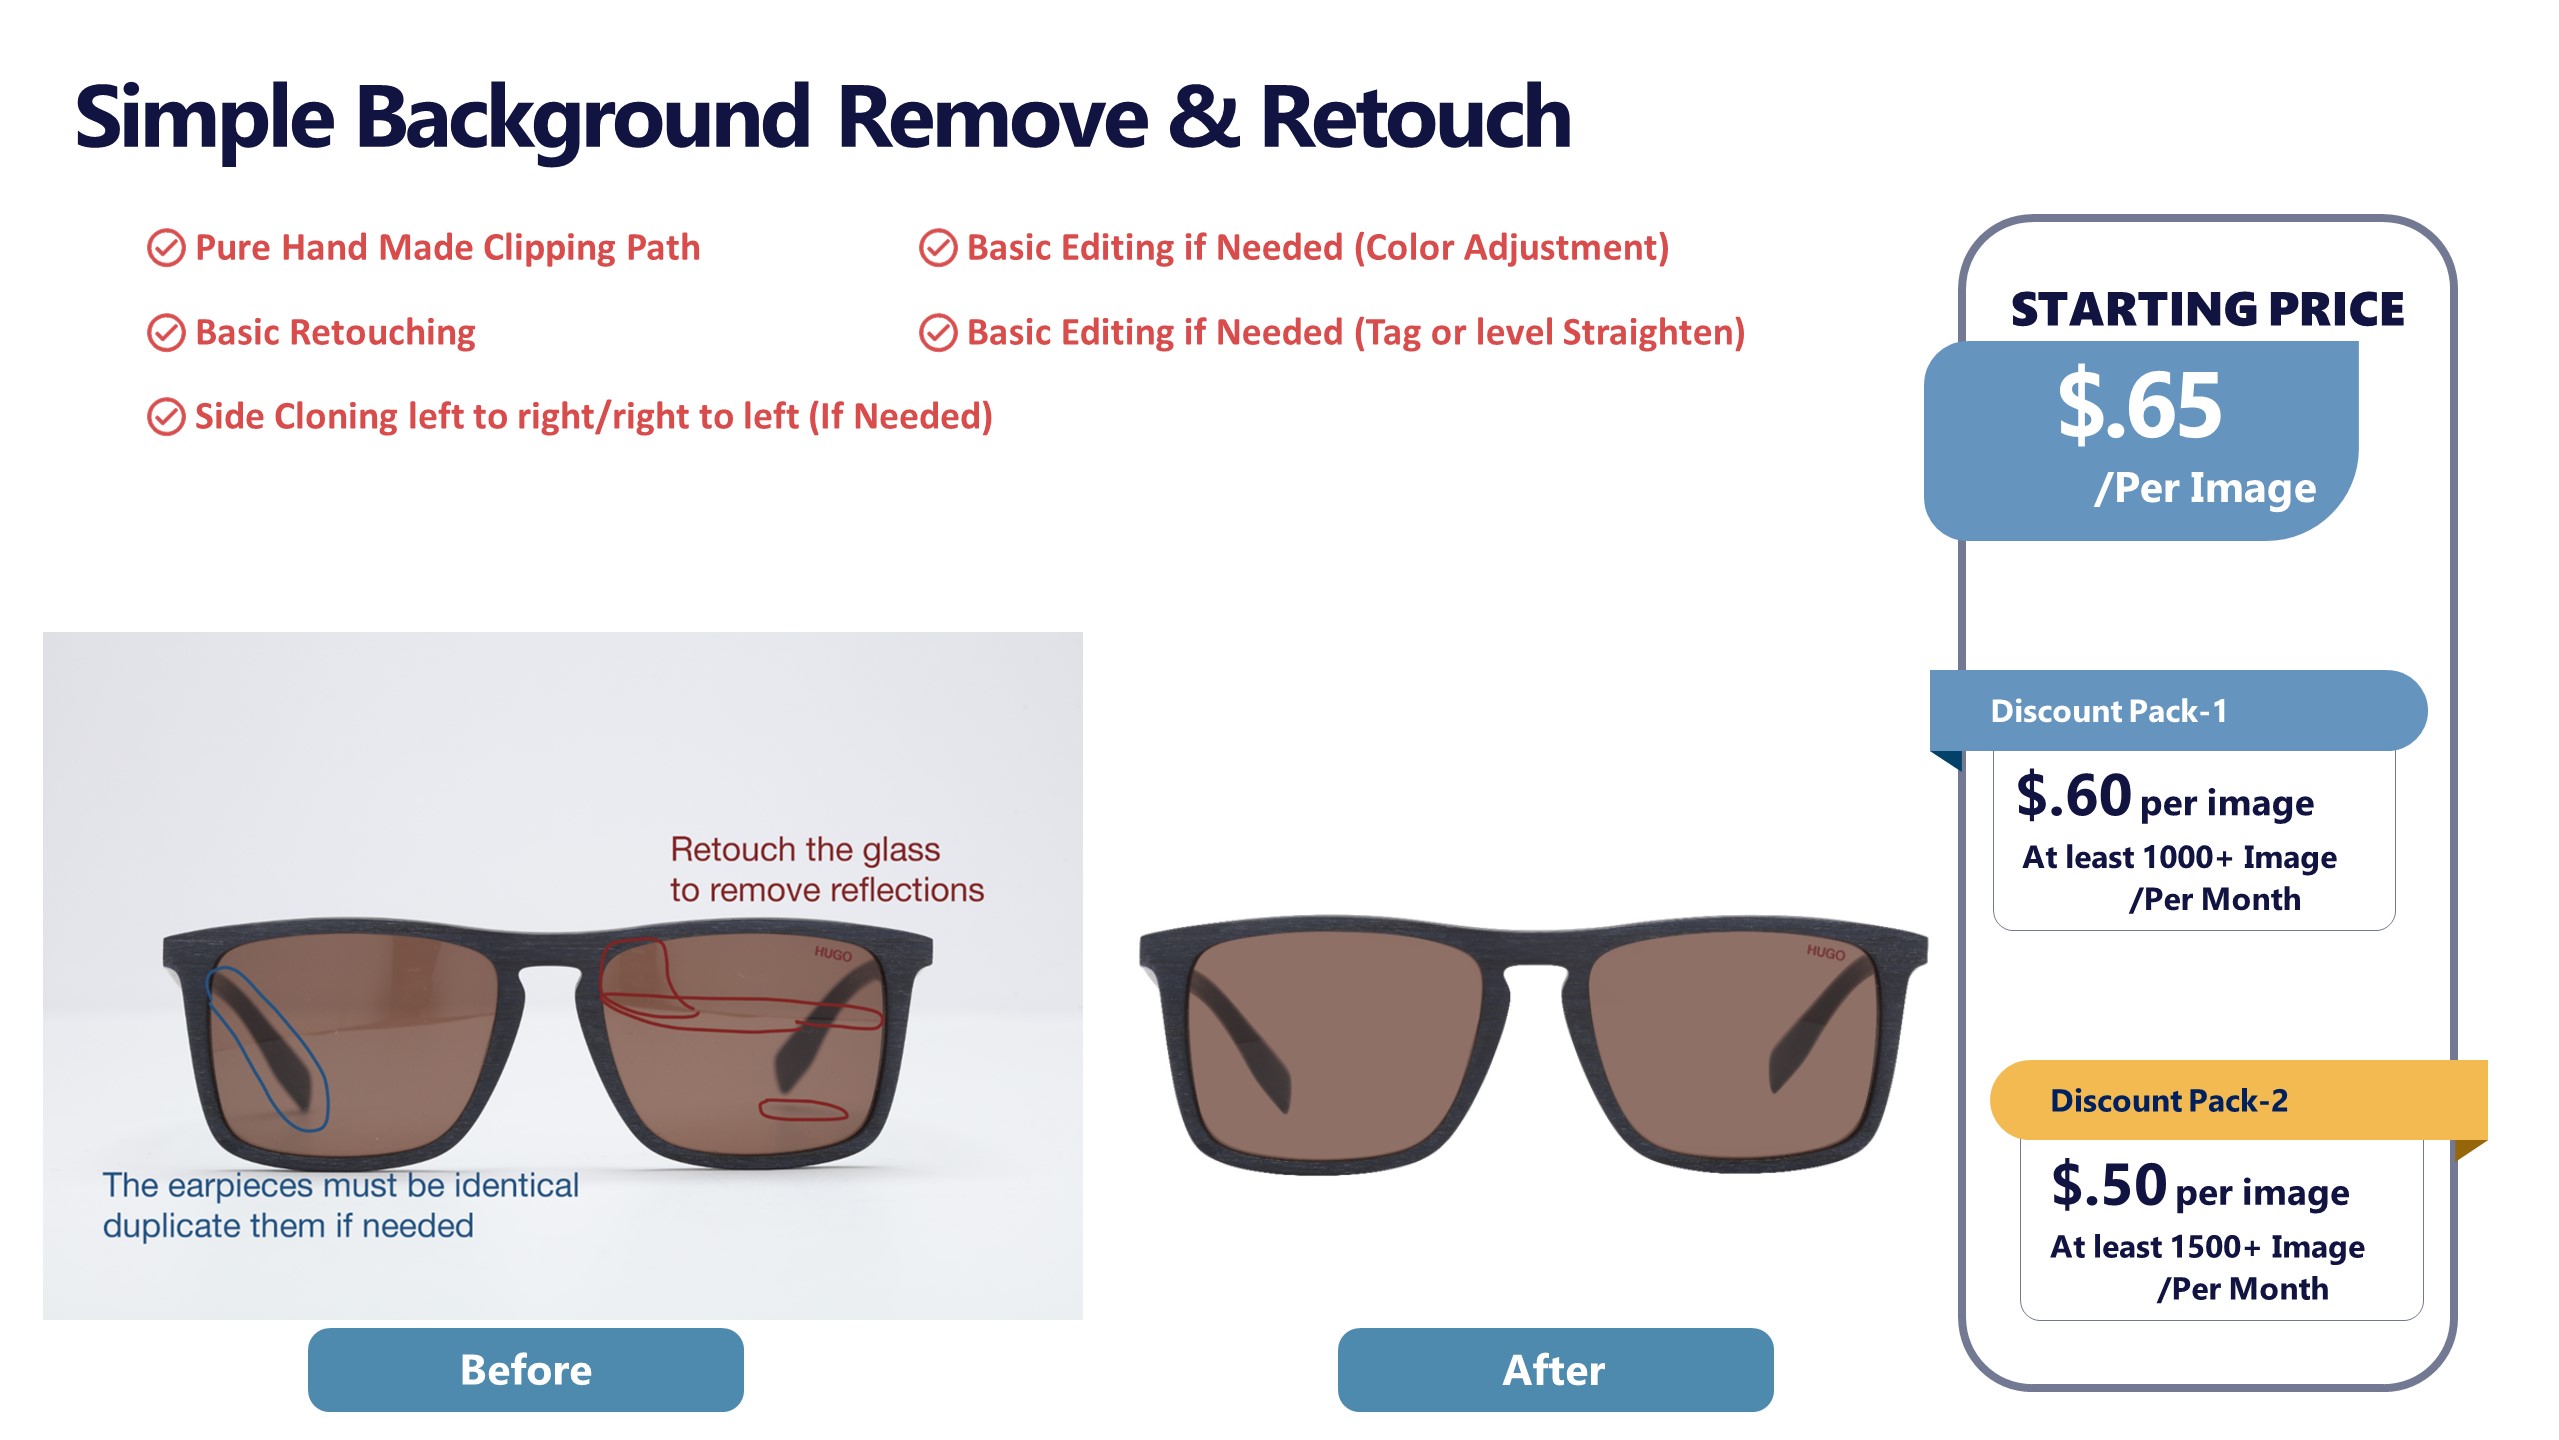 Simple Background Remove & Retouch Dot Clipping-2